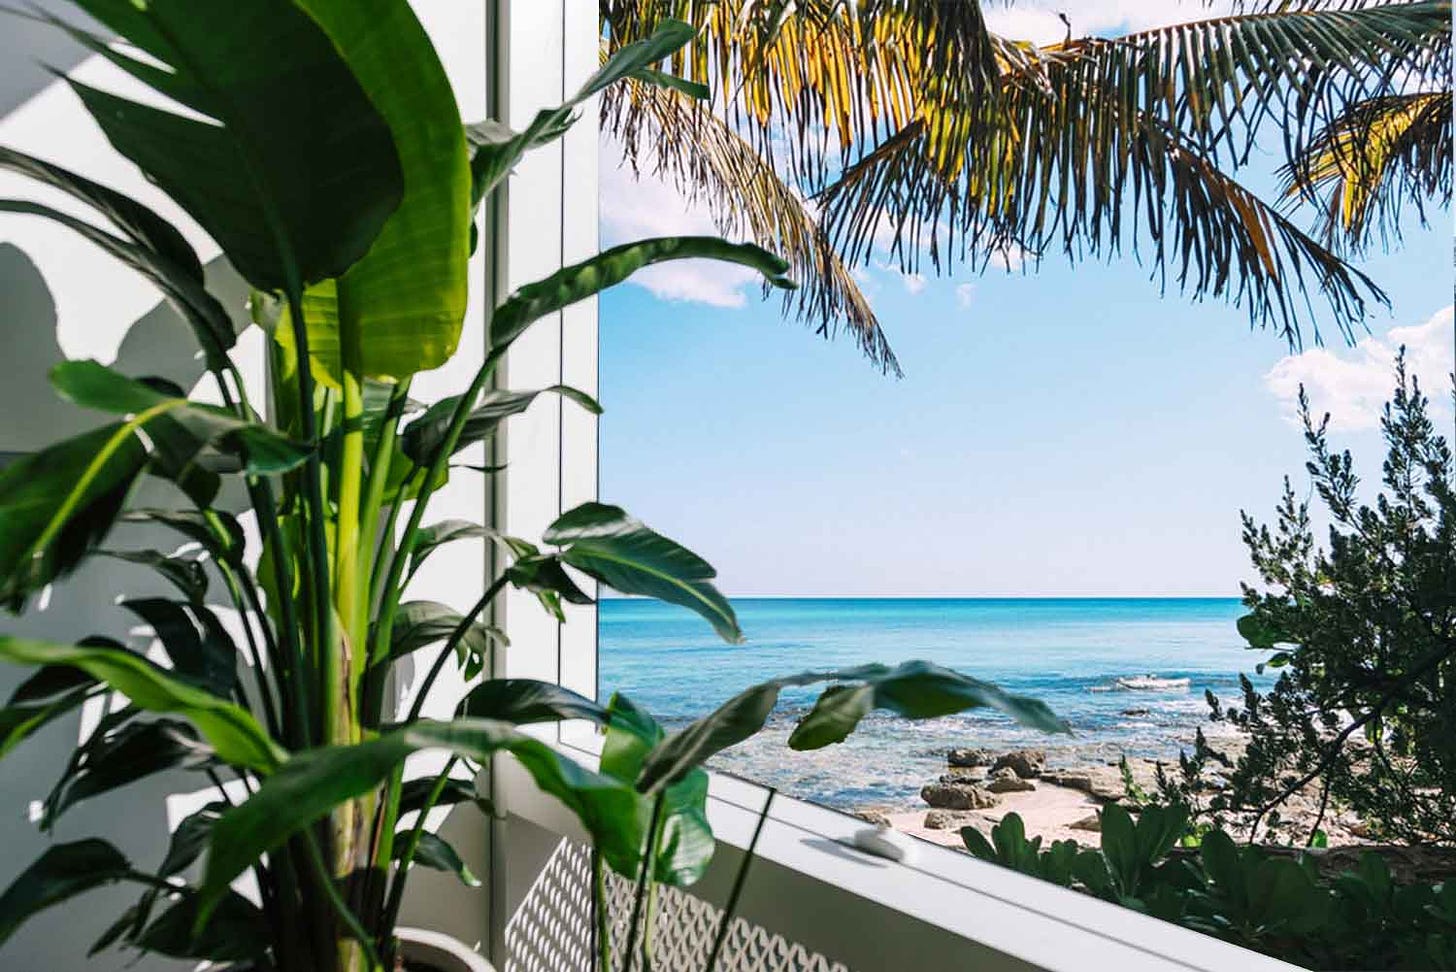 A virtual background of an office plant in front of a window that’s been photoshopped to reveal a picturesque seaside in the background.